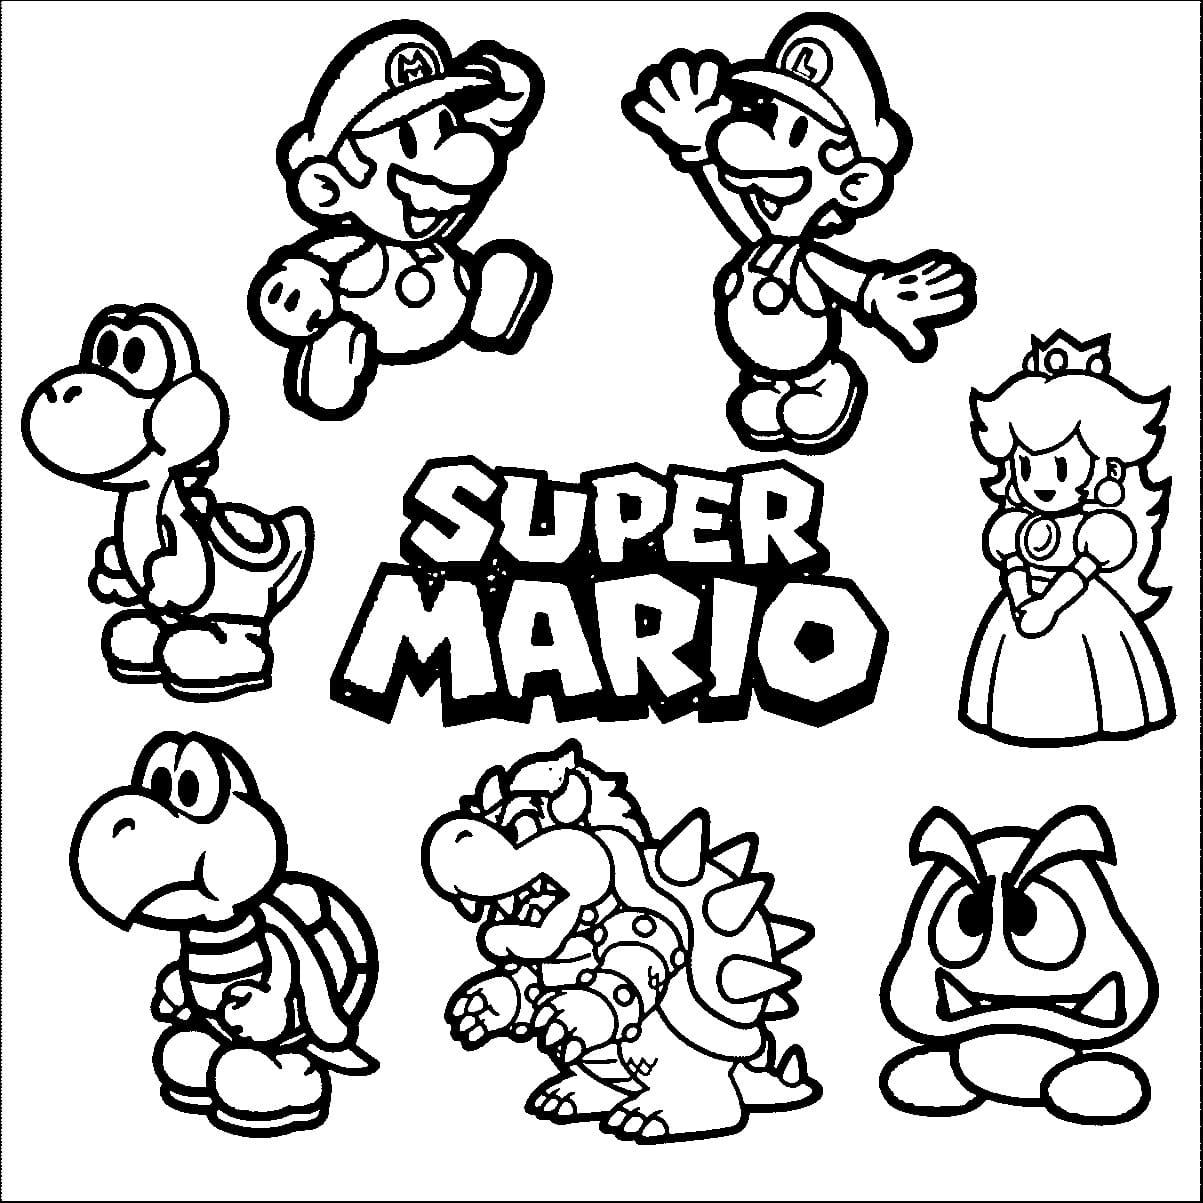 Drawing 02 of Super Mario to print and color